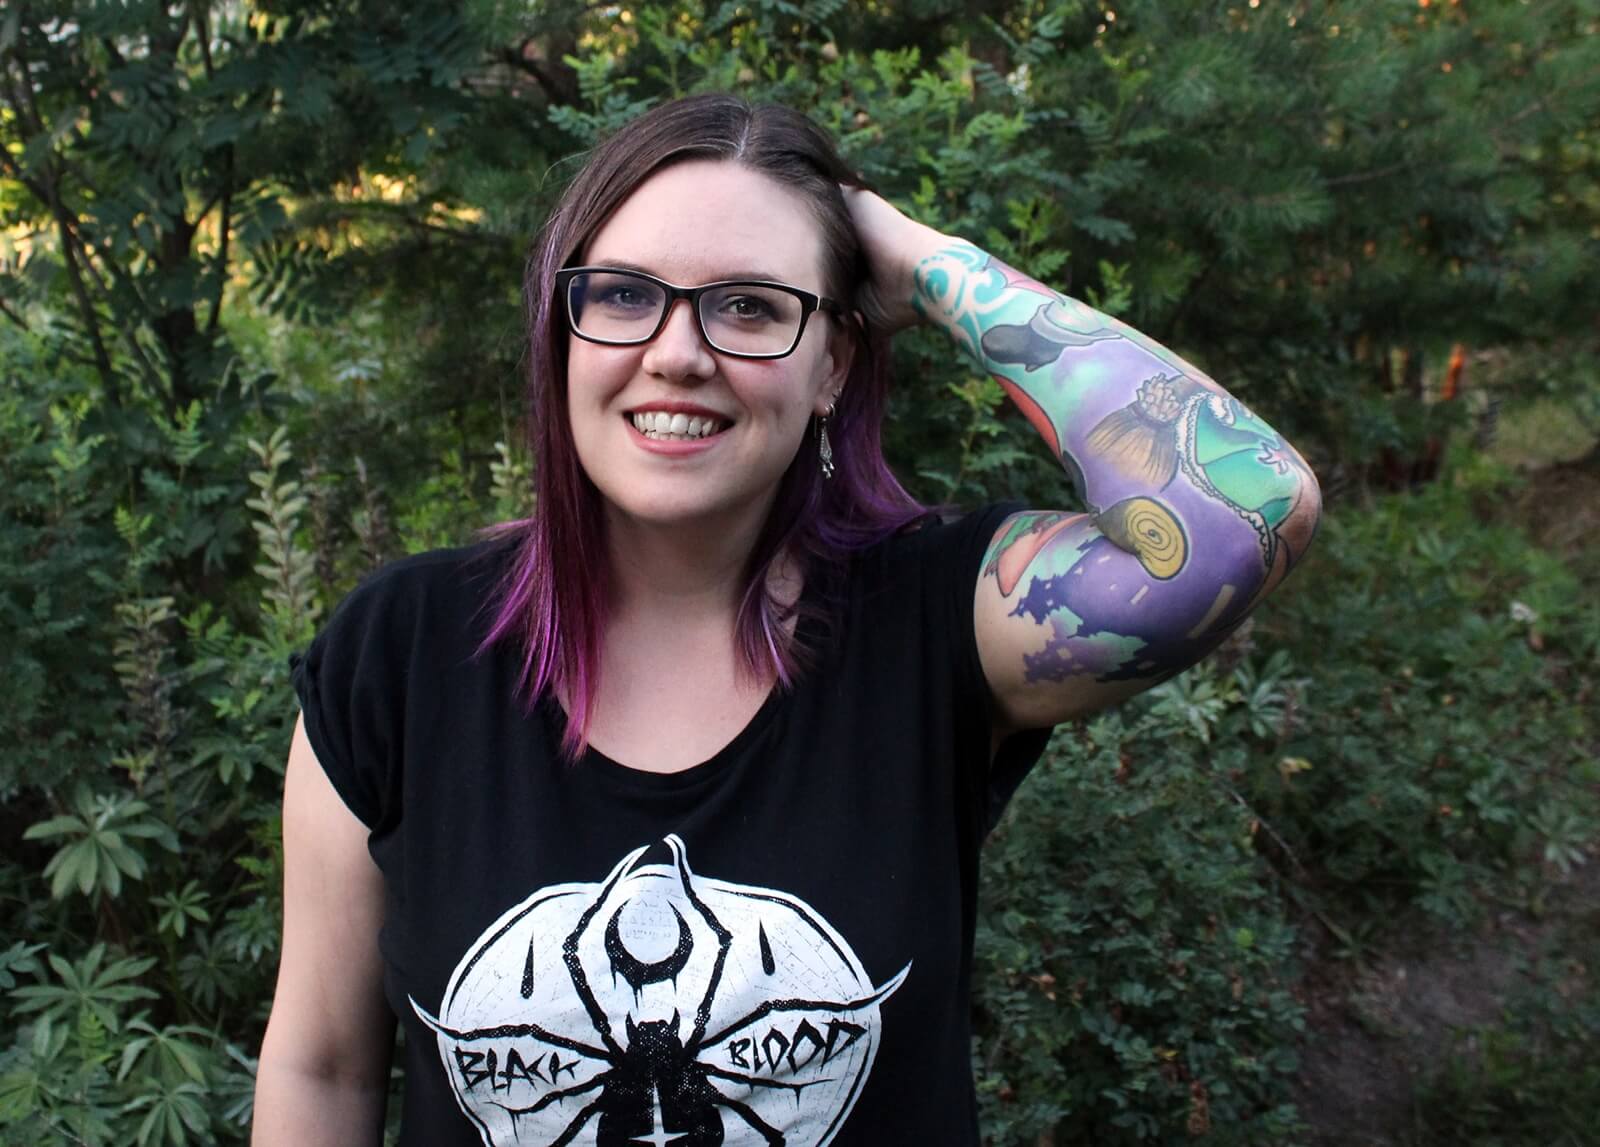 A light-skinned woman wearing glasses and a black t-shirt. She has purple and brown hair. Her hand is held to her head with her elbow out to the side. Her arm has many tattoos.